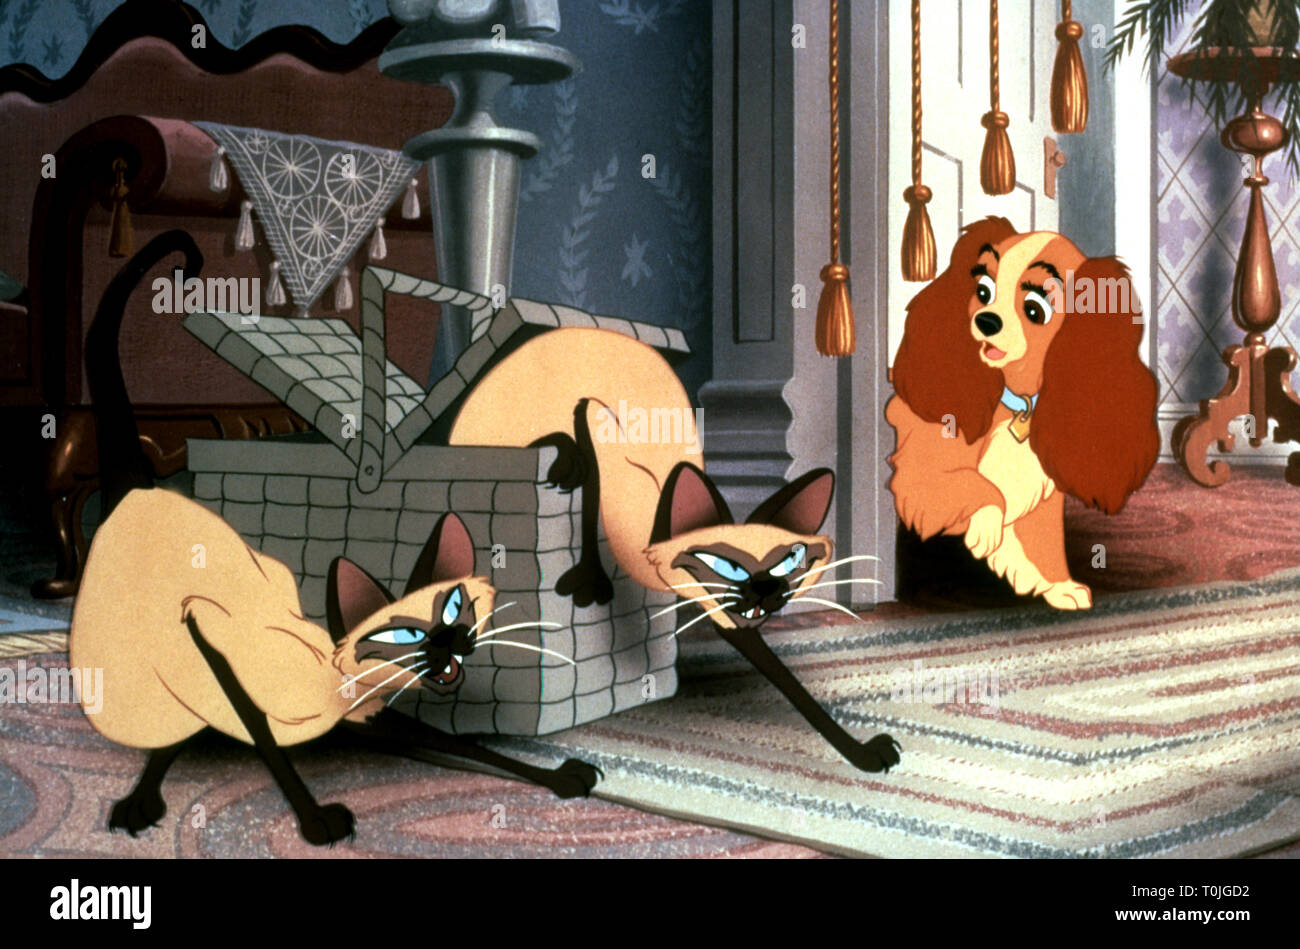 SIAMESE CATS, LADY, LADY AND THE TRAMP, 1955 Stock Photo